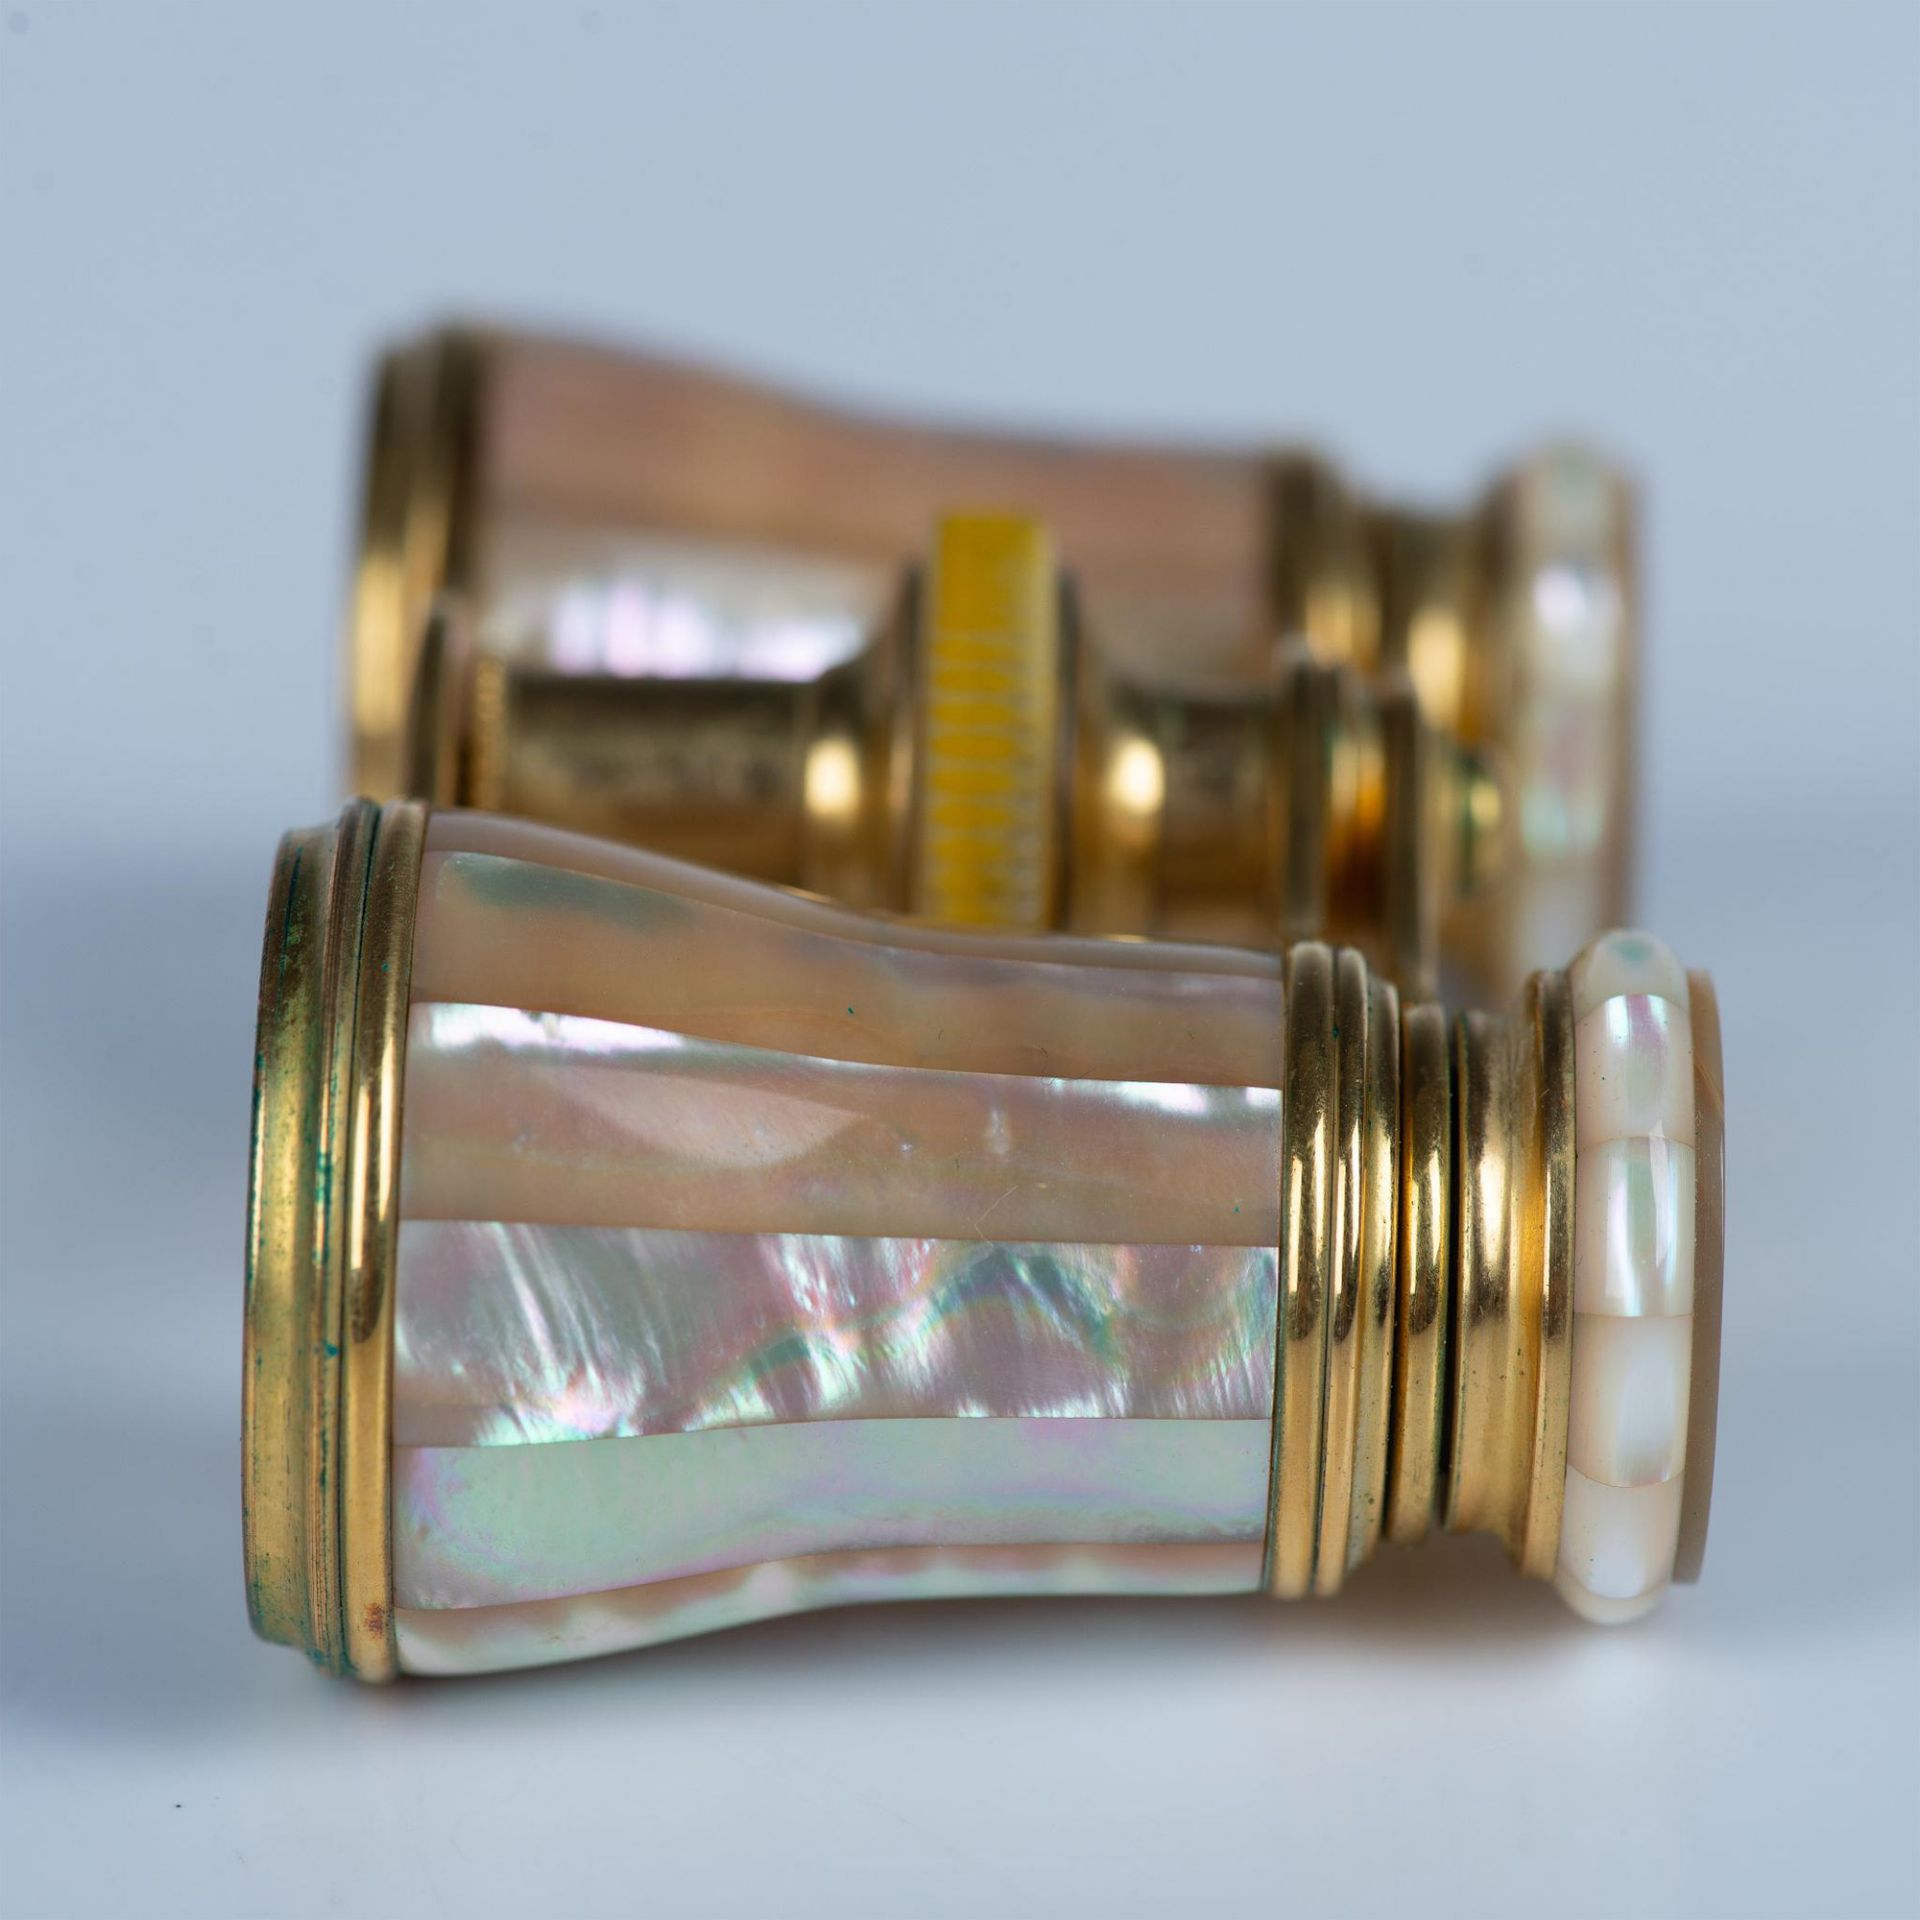 Lemaire Paris Mother of Pearl Fabt Opera Glasses & Case - Image 4 of 6